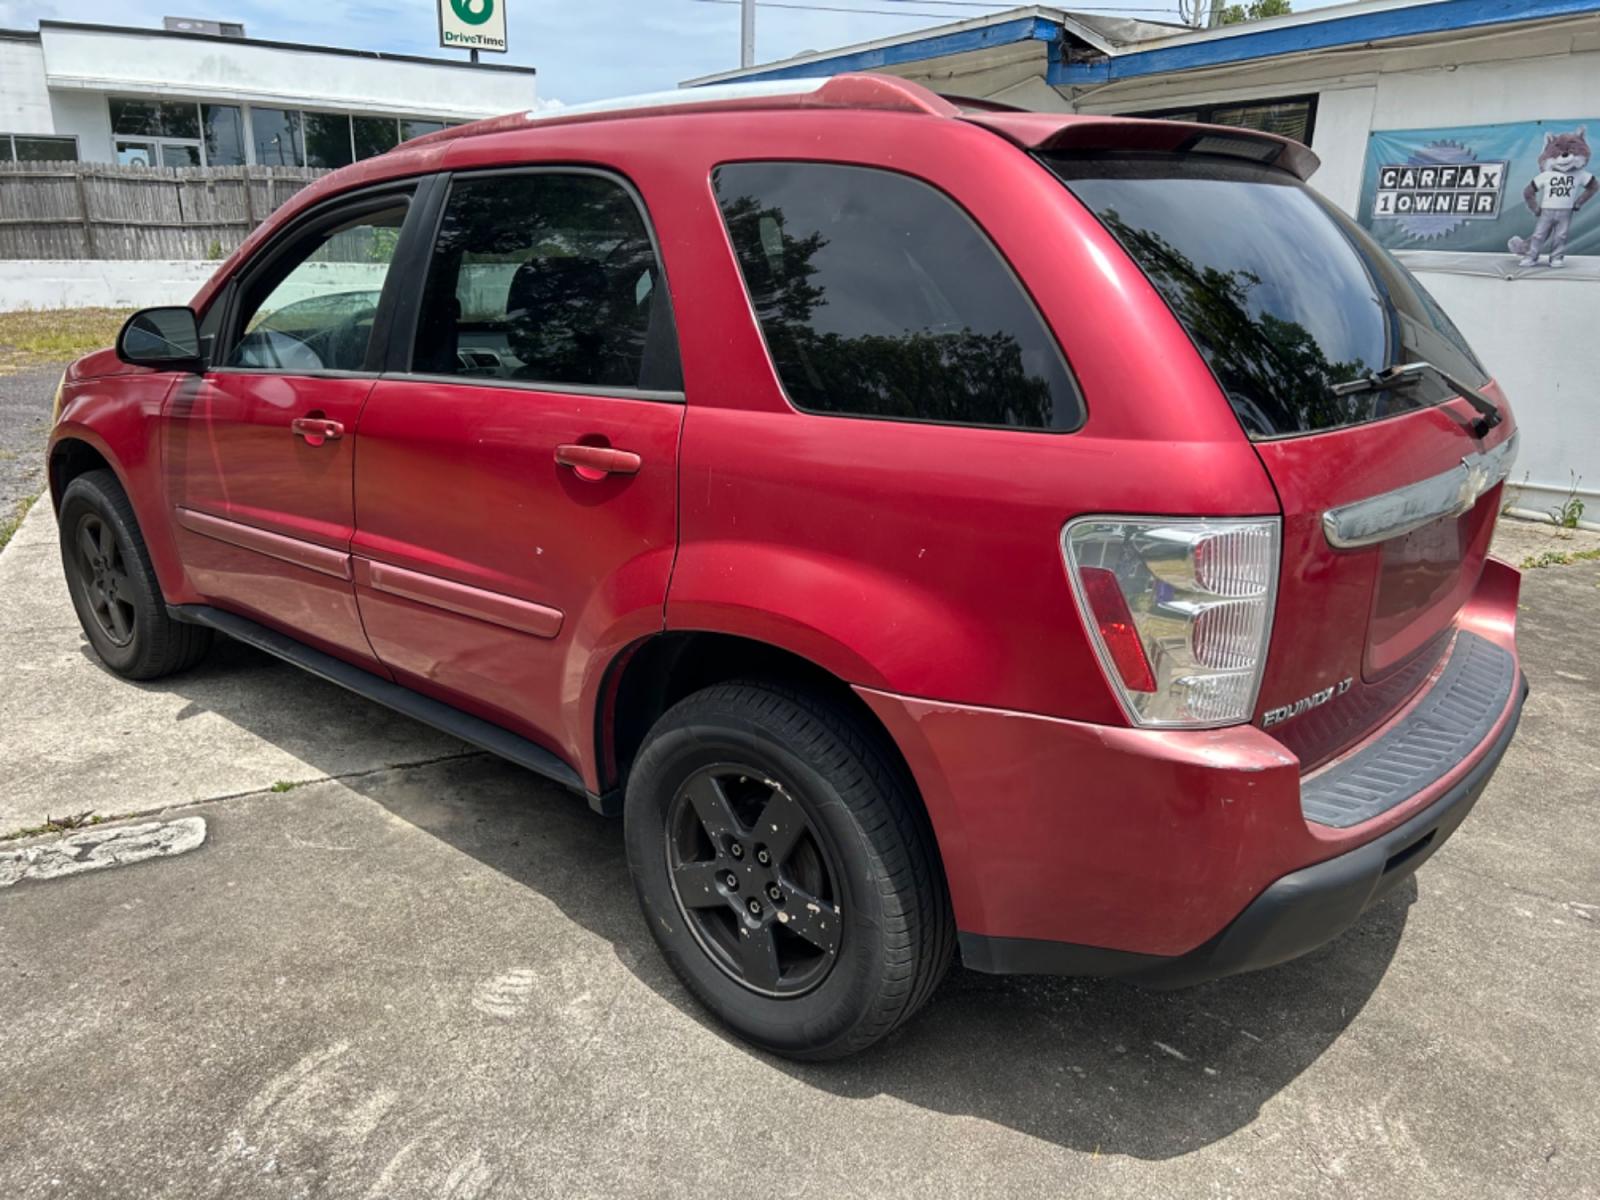 2005 Chevrolet Equinox (2CNDL63F156) , located at 1758 Cassat Ave., Jacksonville, FL, 32210, (904) 384-2799, 30.286720, -81.730652 - LOW MILEAGE!!!!! ONLY 86,523 MILES!!!!! 2005 CHEVROLET EQUINOX LT MODEL LEATHER 4-DOOR AUTOMATIC TRANSMSSION ICE COLD AIR CONDITIONING RUNS GREAT $3900.00 DON'T HESITATE OR THIS ONE WILL BE GONE CALL US @ 904-384-2799 - Photo #4